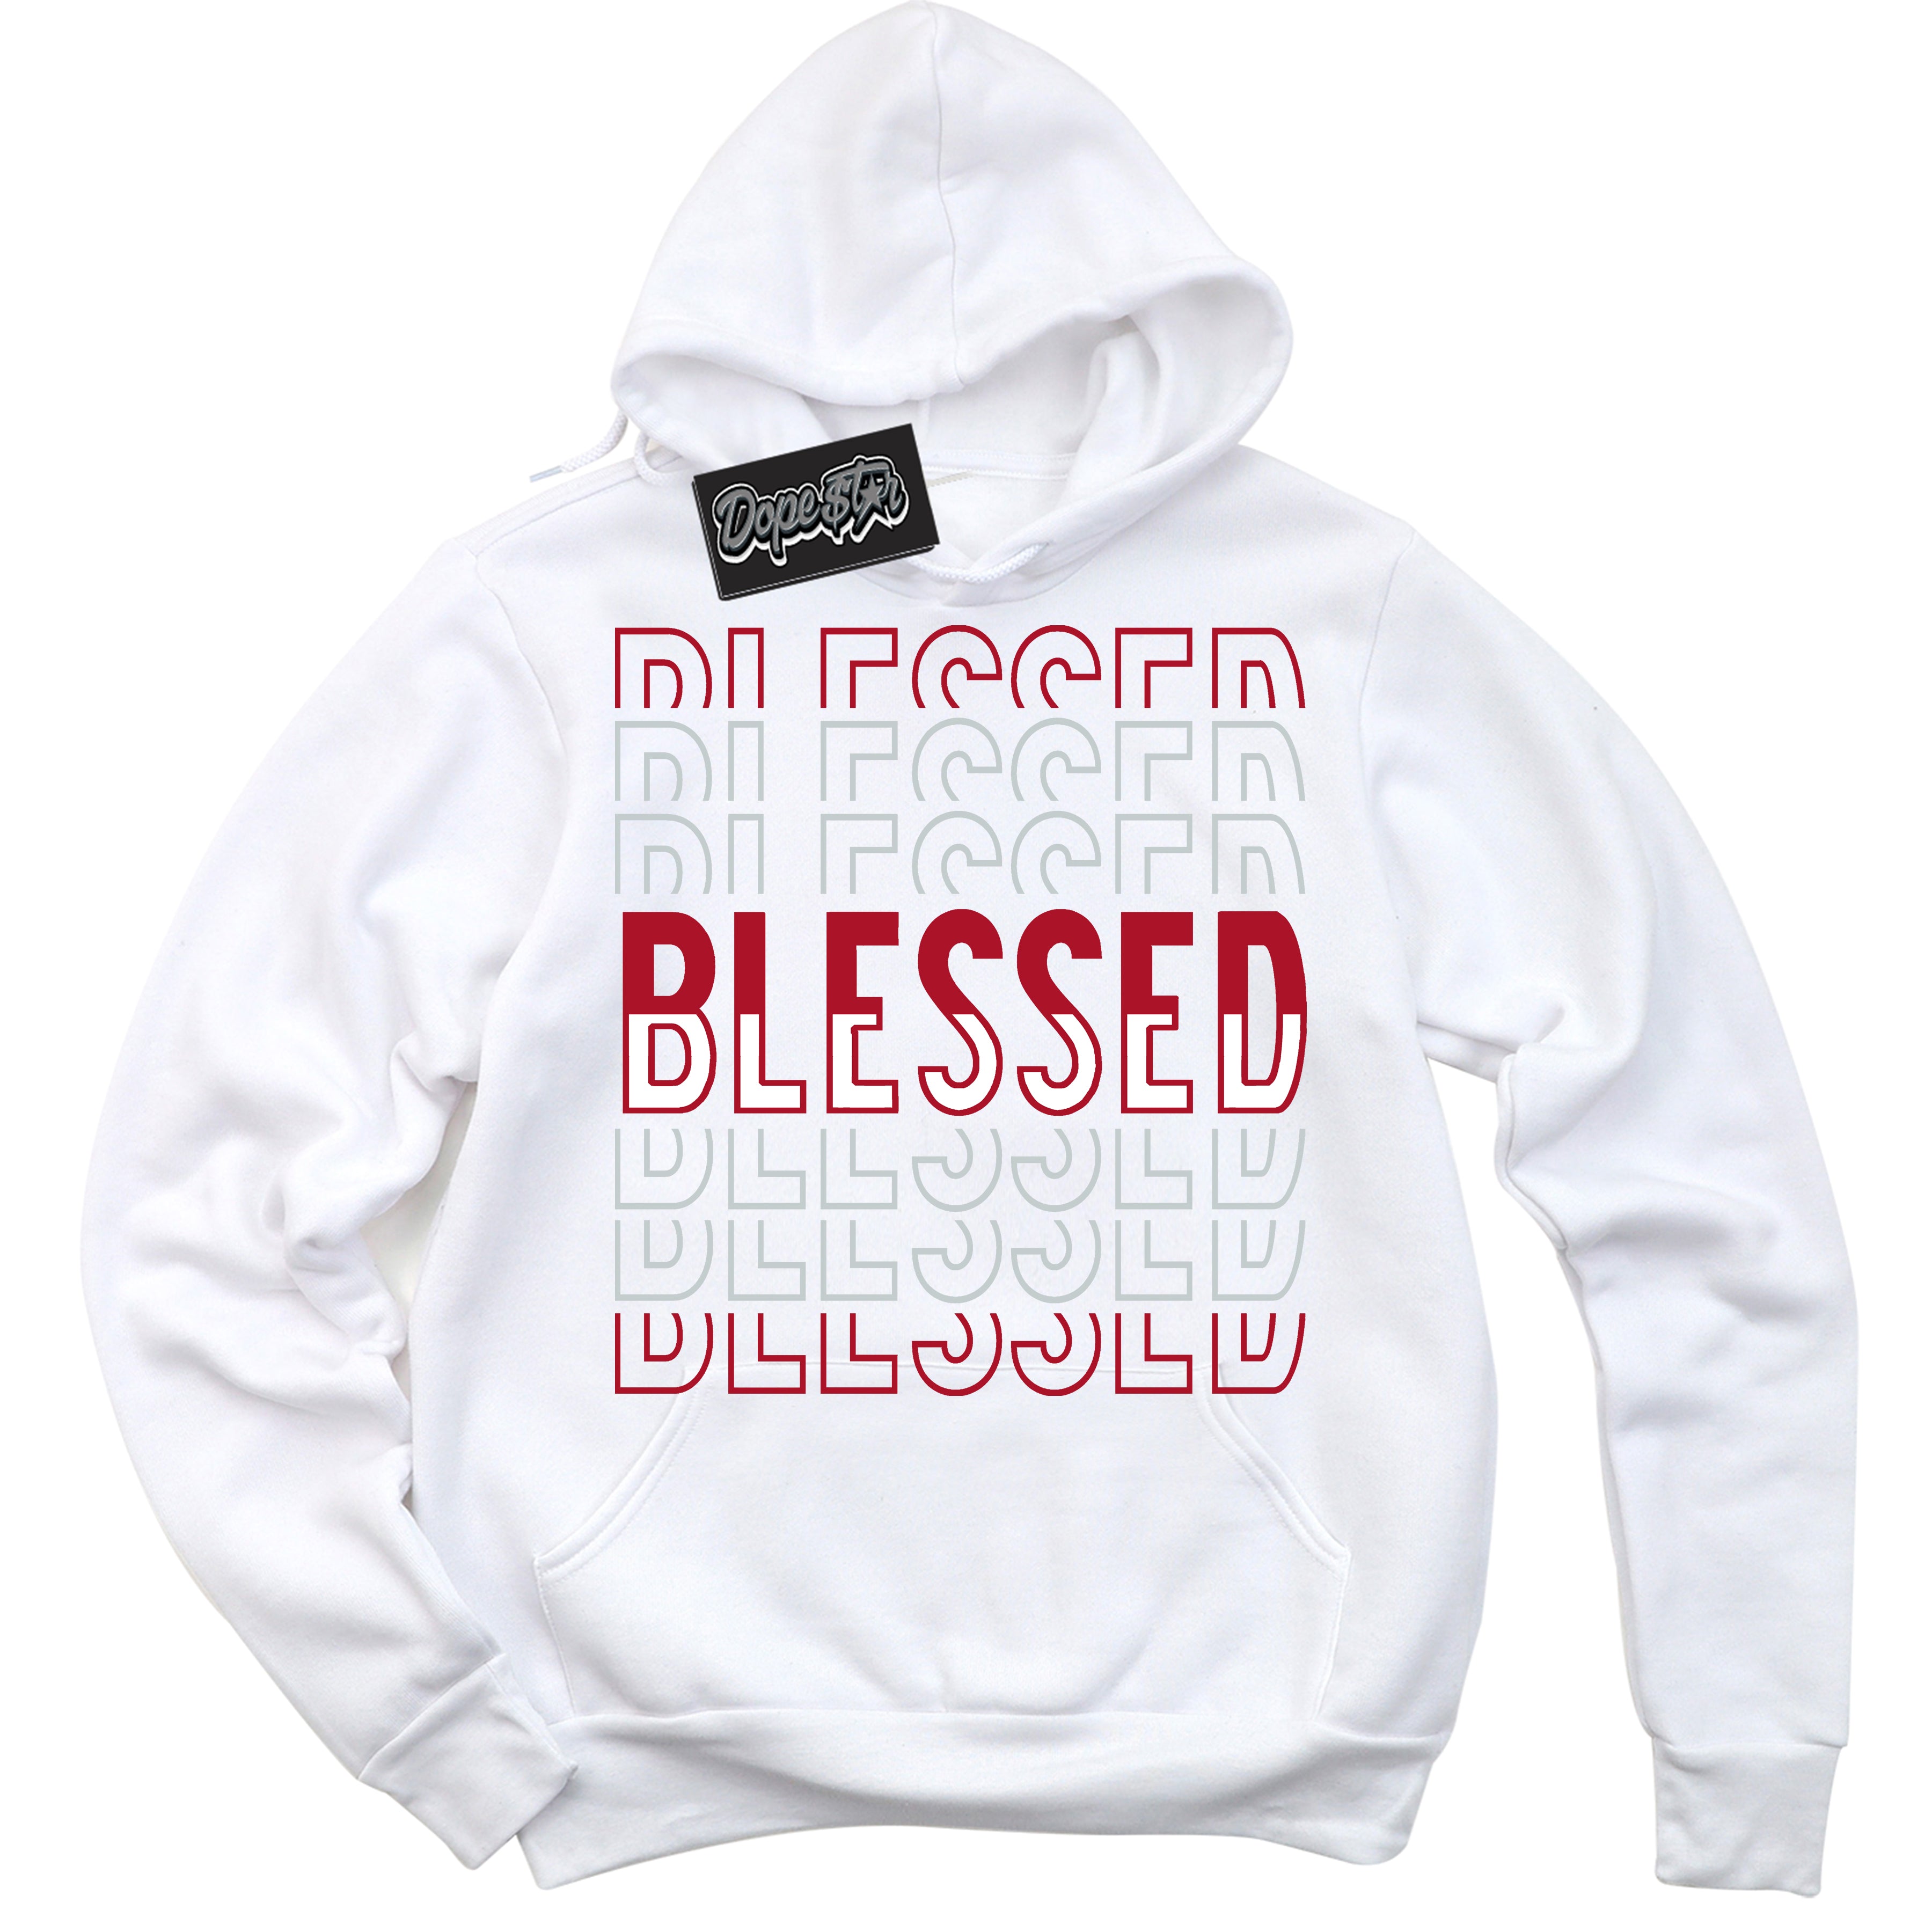 Cool White Hoodie with “ Blessed Stacked ”  design that Perfectly Matches  Reverse Ultraman Sneakers.